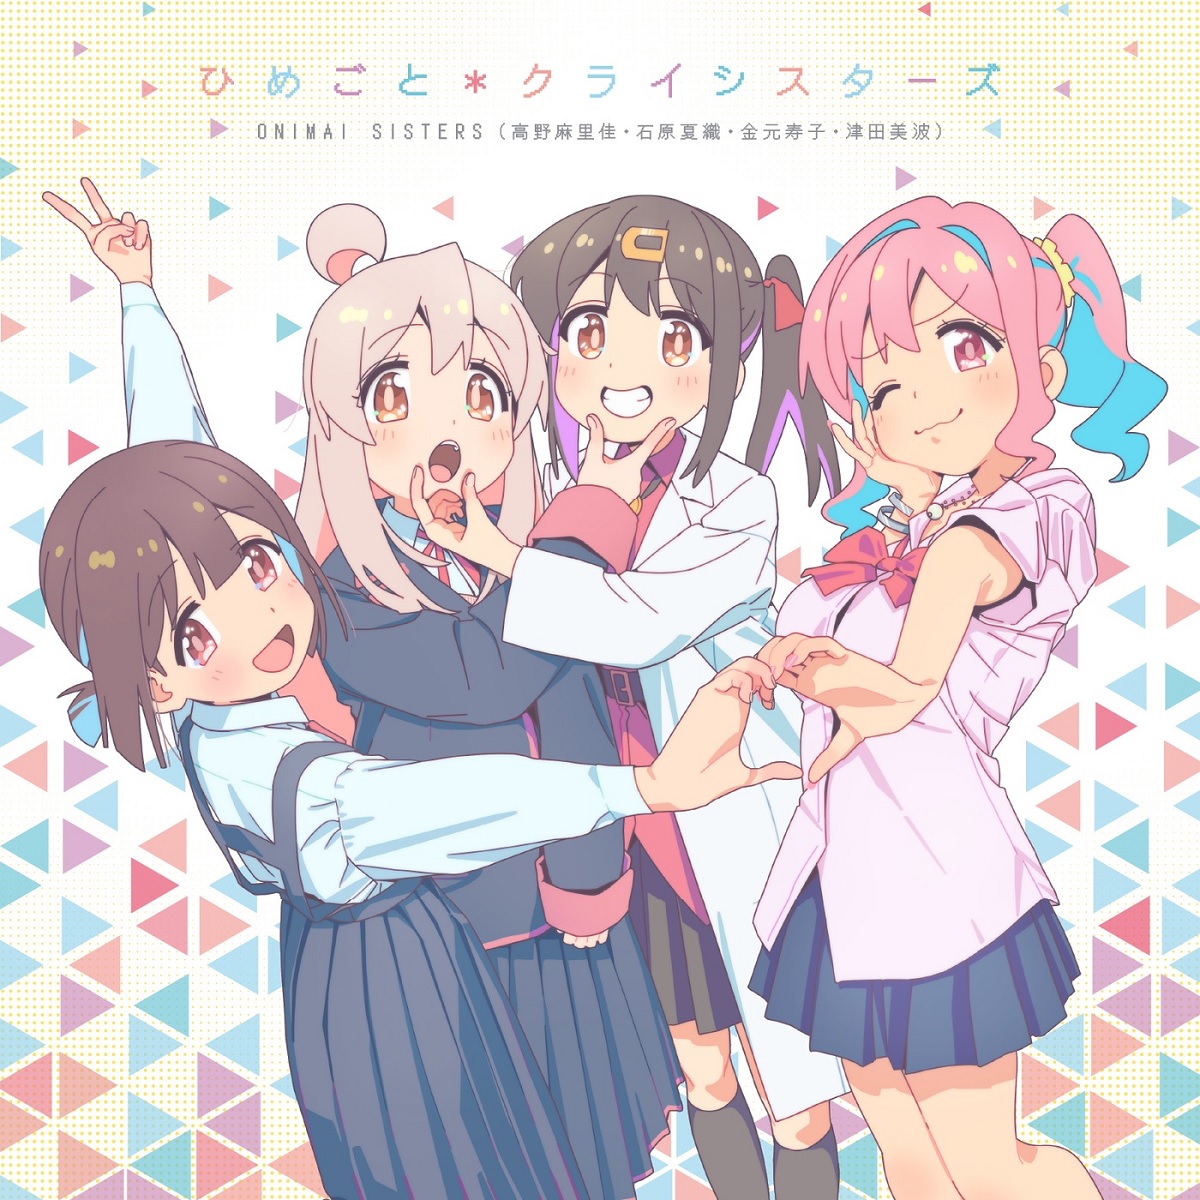 Cover art for『ONIMAI SISTERS - ひめごと＊クライシスターズ』from the release『Himegoto*Crisisters